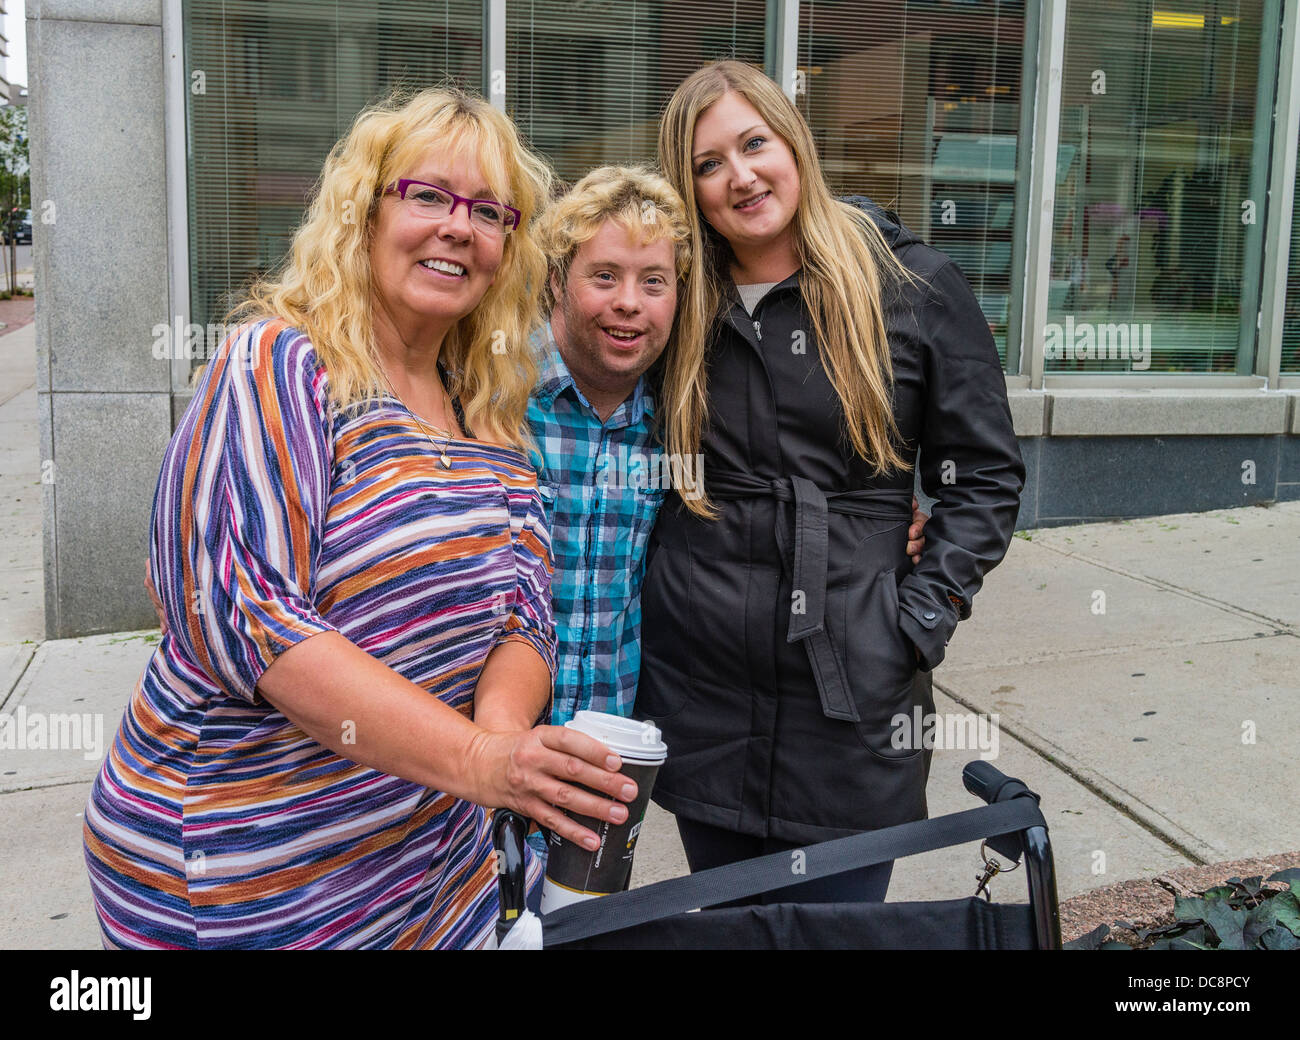 A Downs Syndrome boy smiles and stands between his mother and sister on a street in St. John, Nova Scotia, Canada. Stock Photo